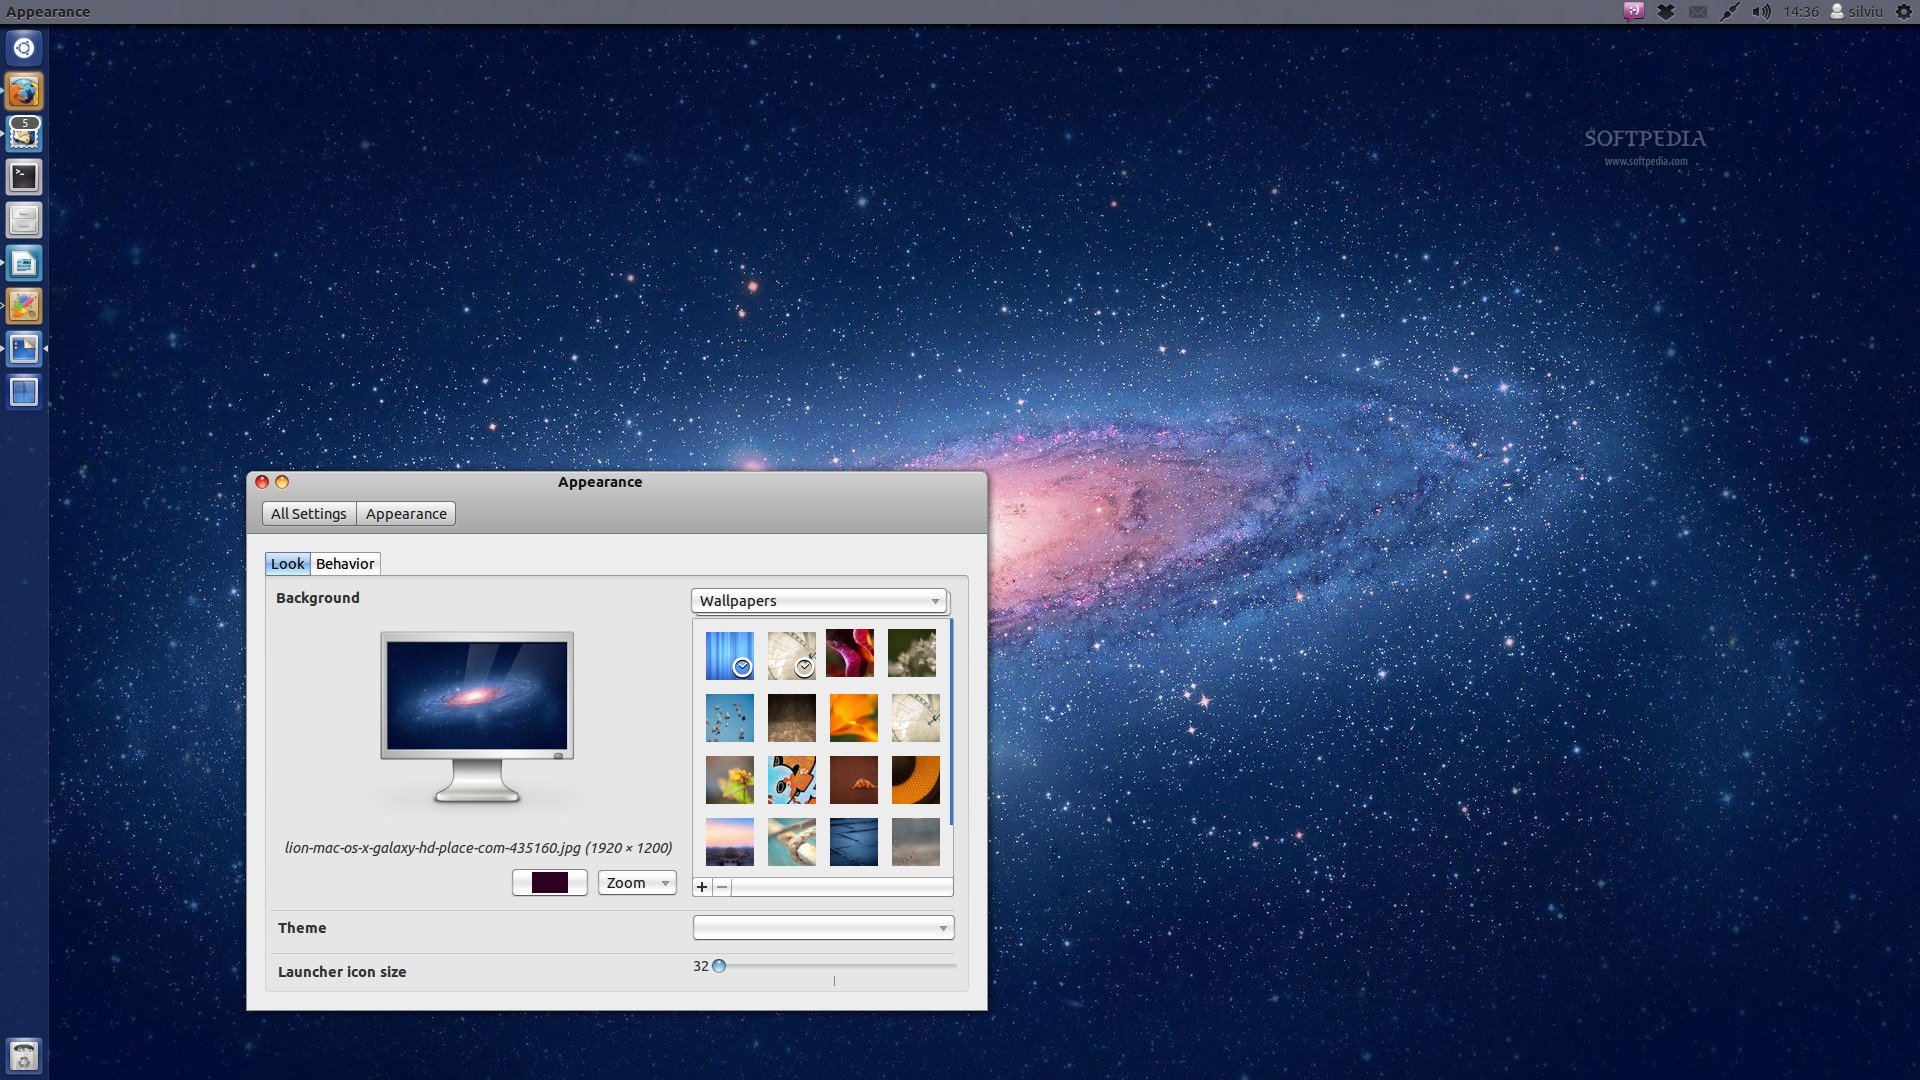 MAC OS X LION THEME FOR UBUNTU 12.04/12.10/11.10 (2ND VERSION COMPLETED)